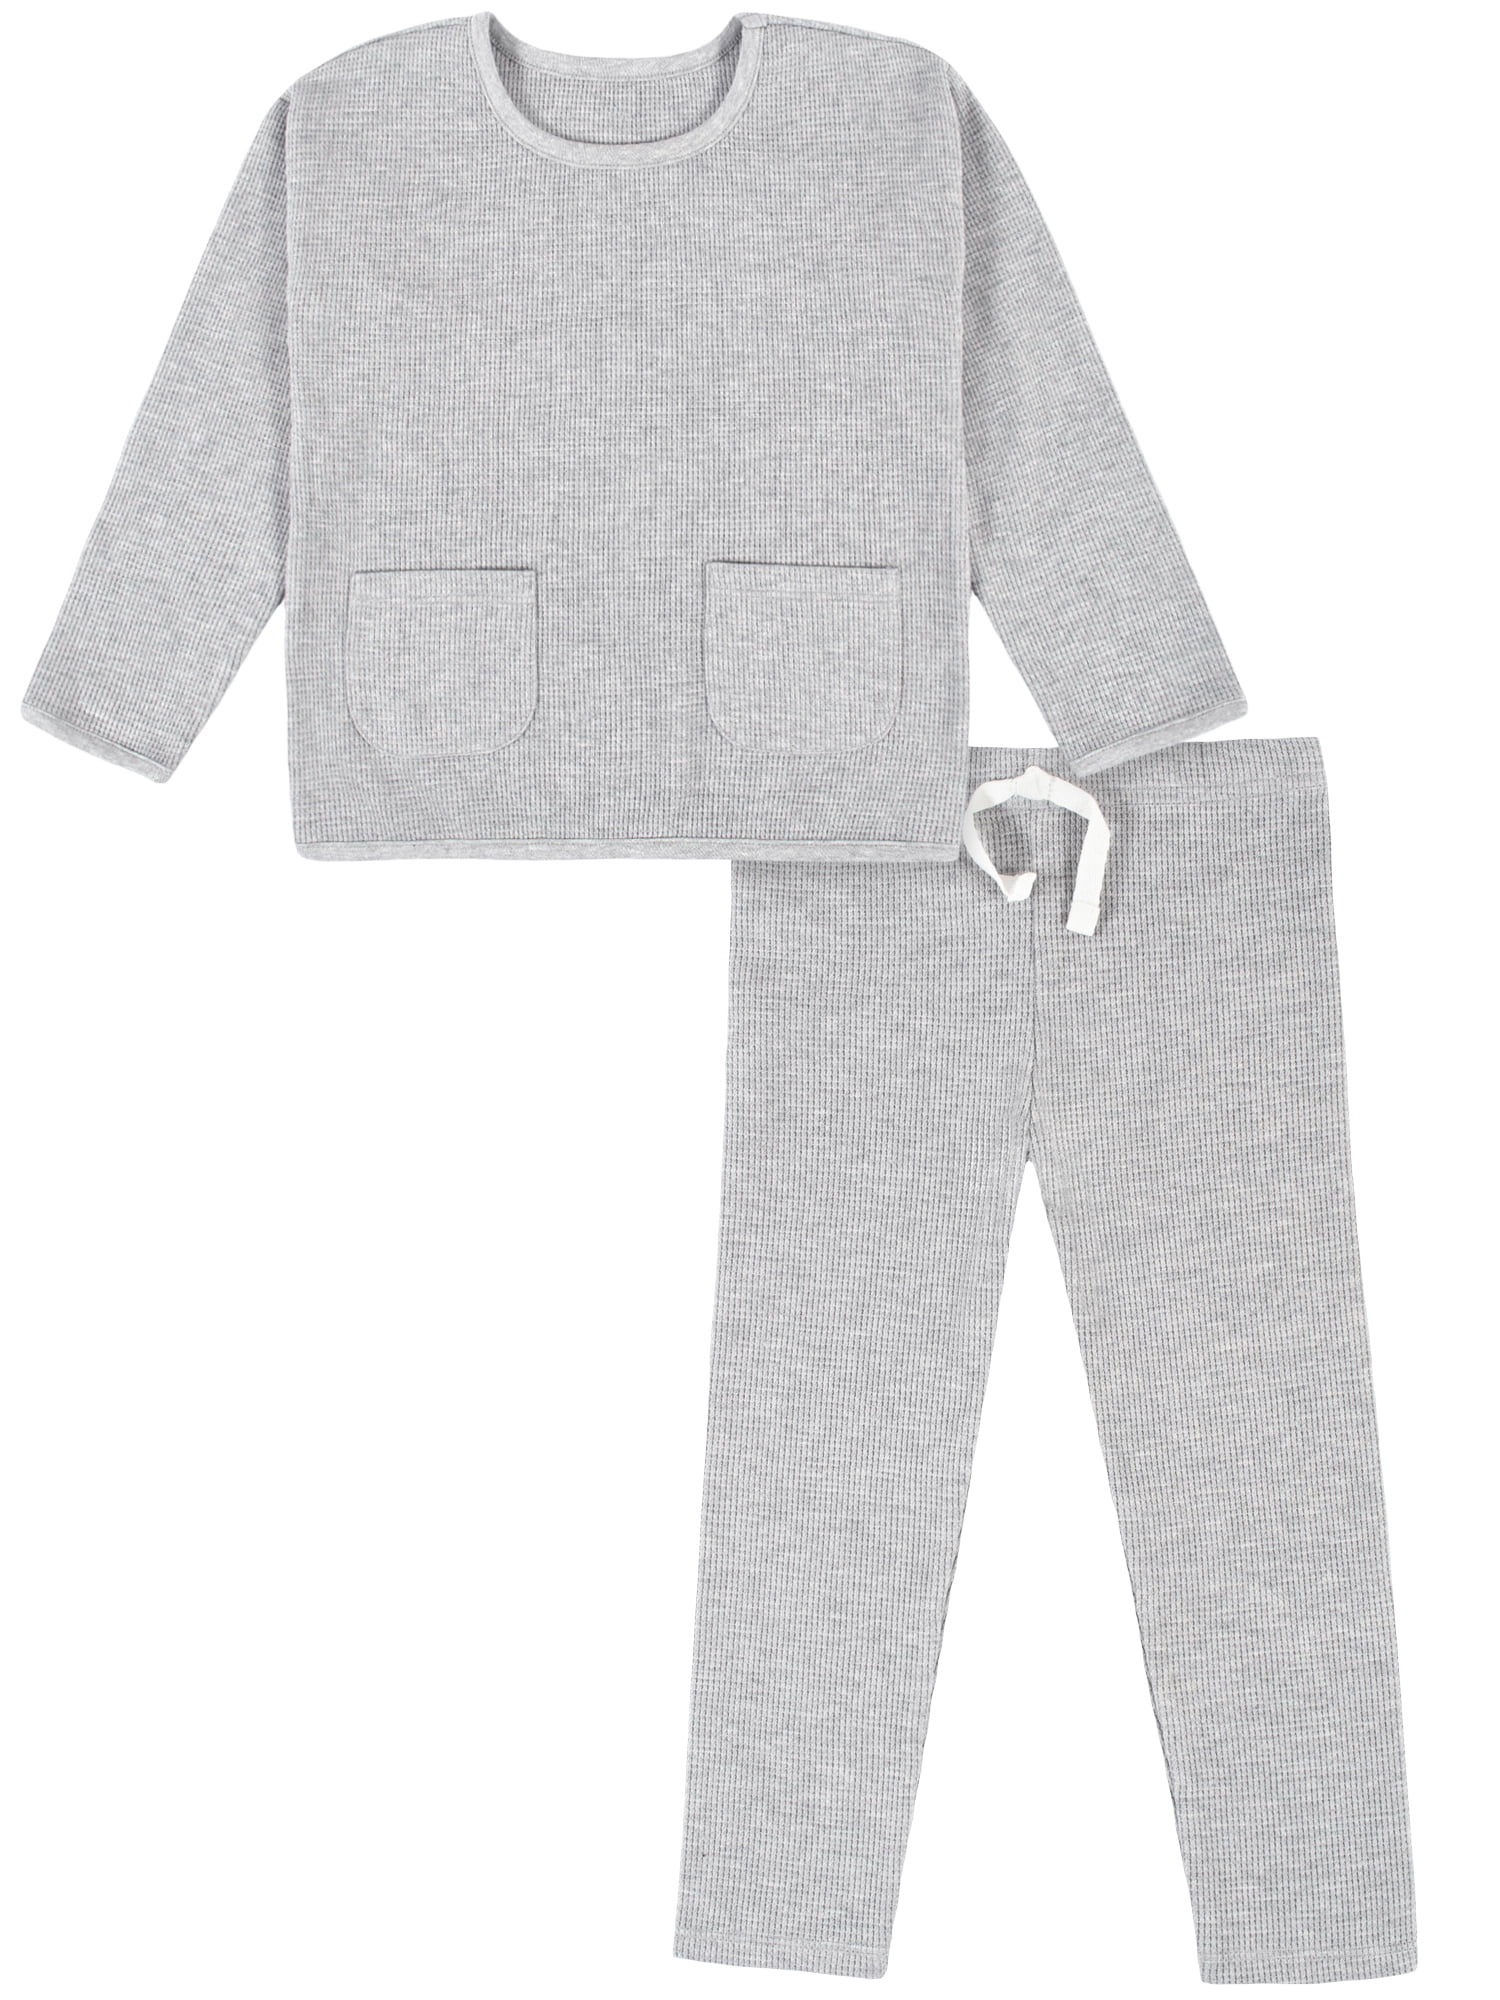 Modern Moments by Gerber Baby & Toddler Girls Waffle Top & Pant 2 Piece ...